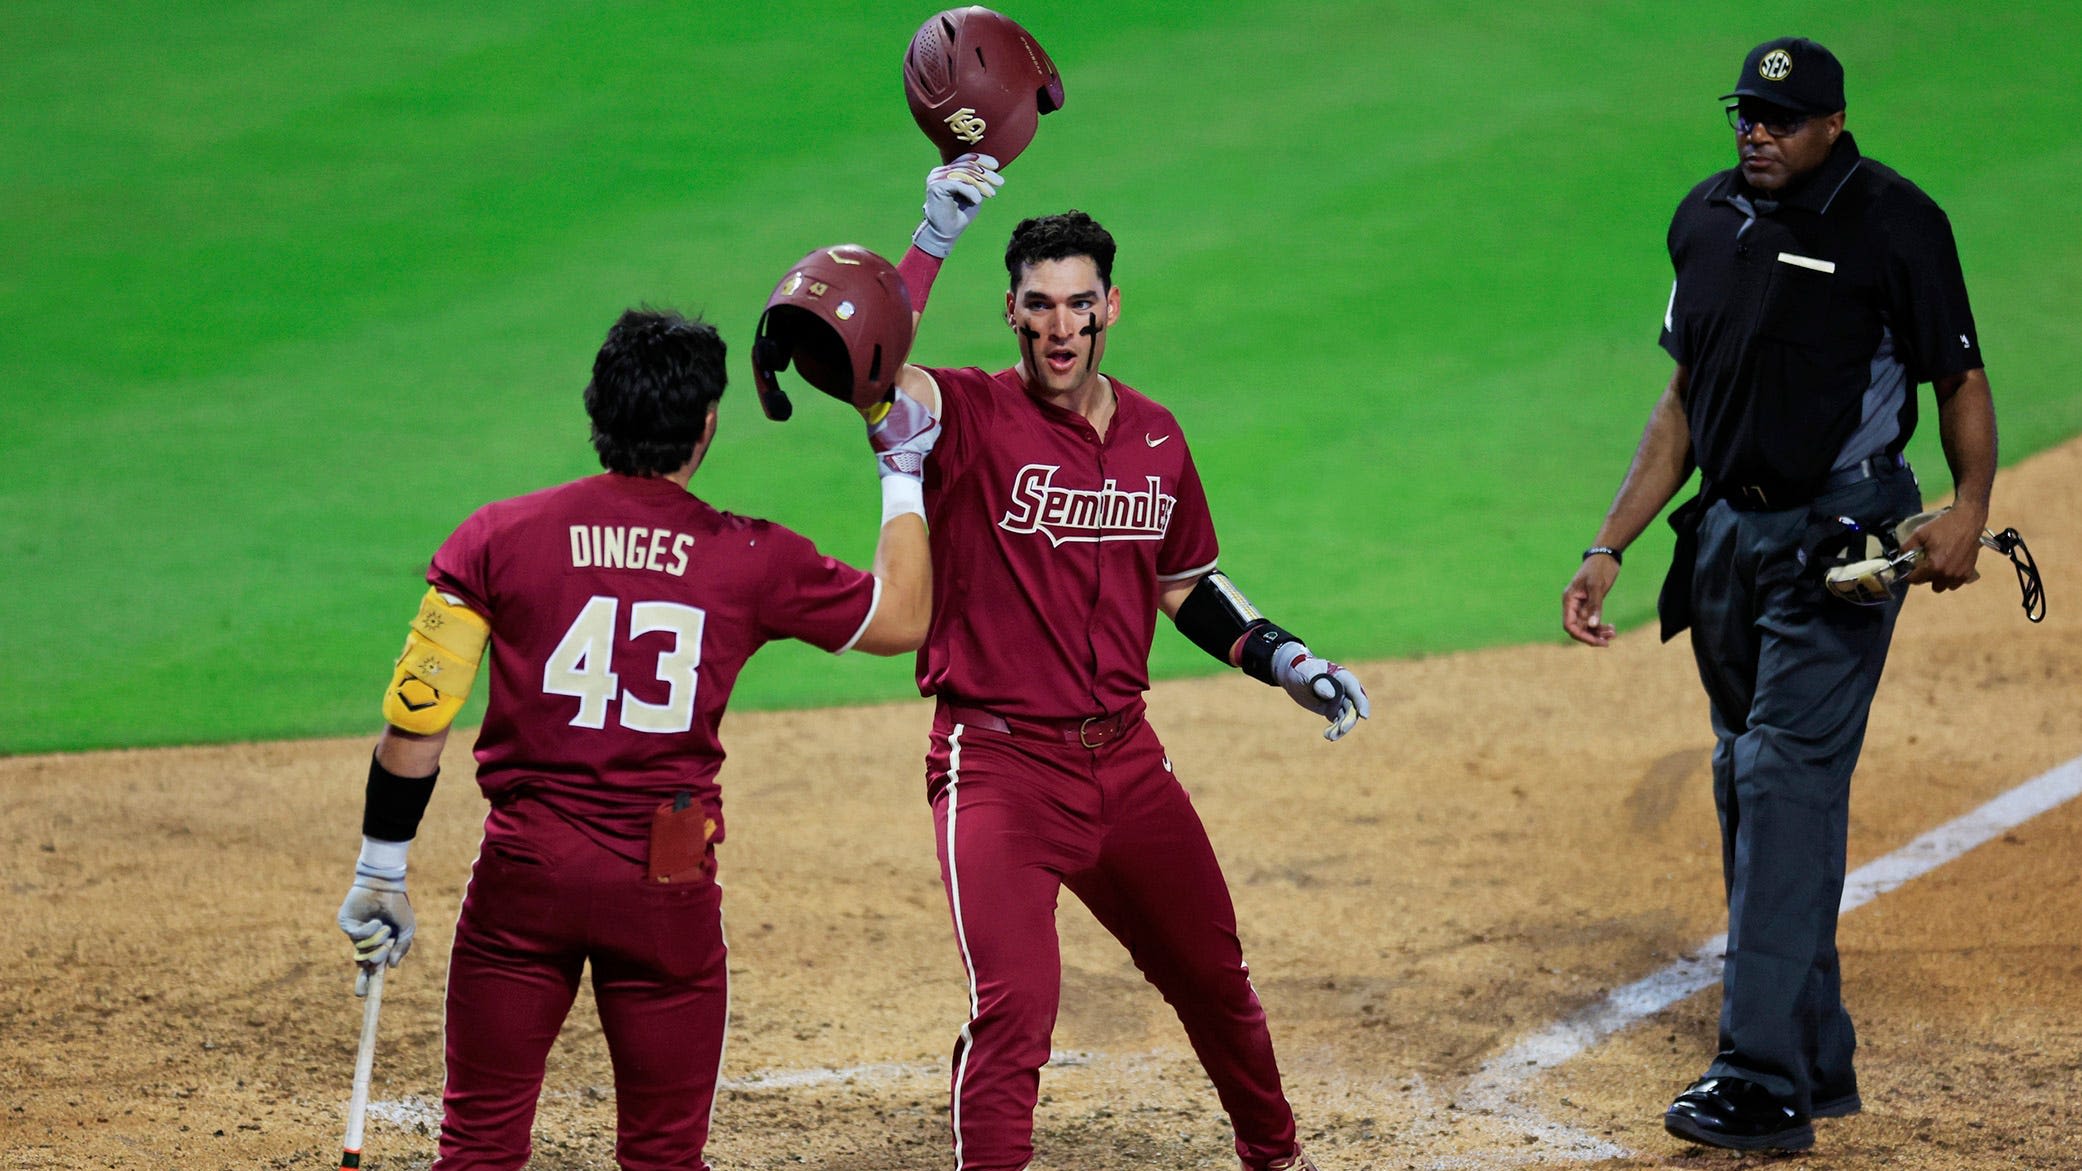 FSU baseball launches back-to-back home runs to take early lead vs. UConn in super regionals